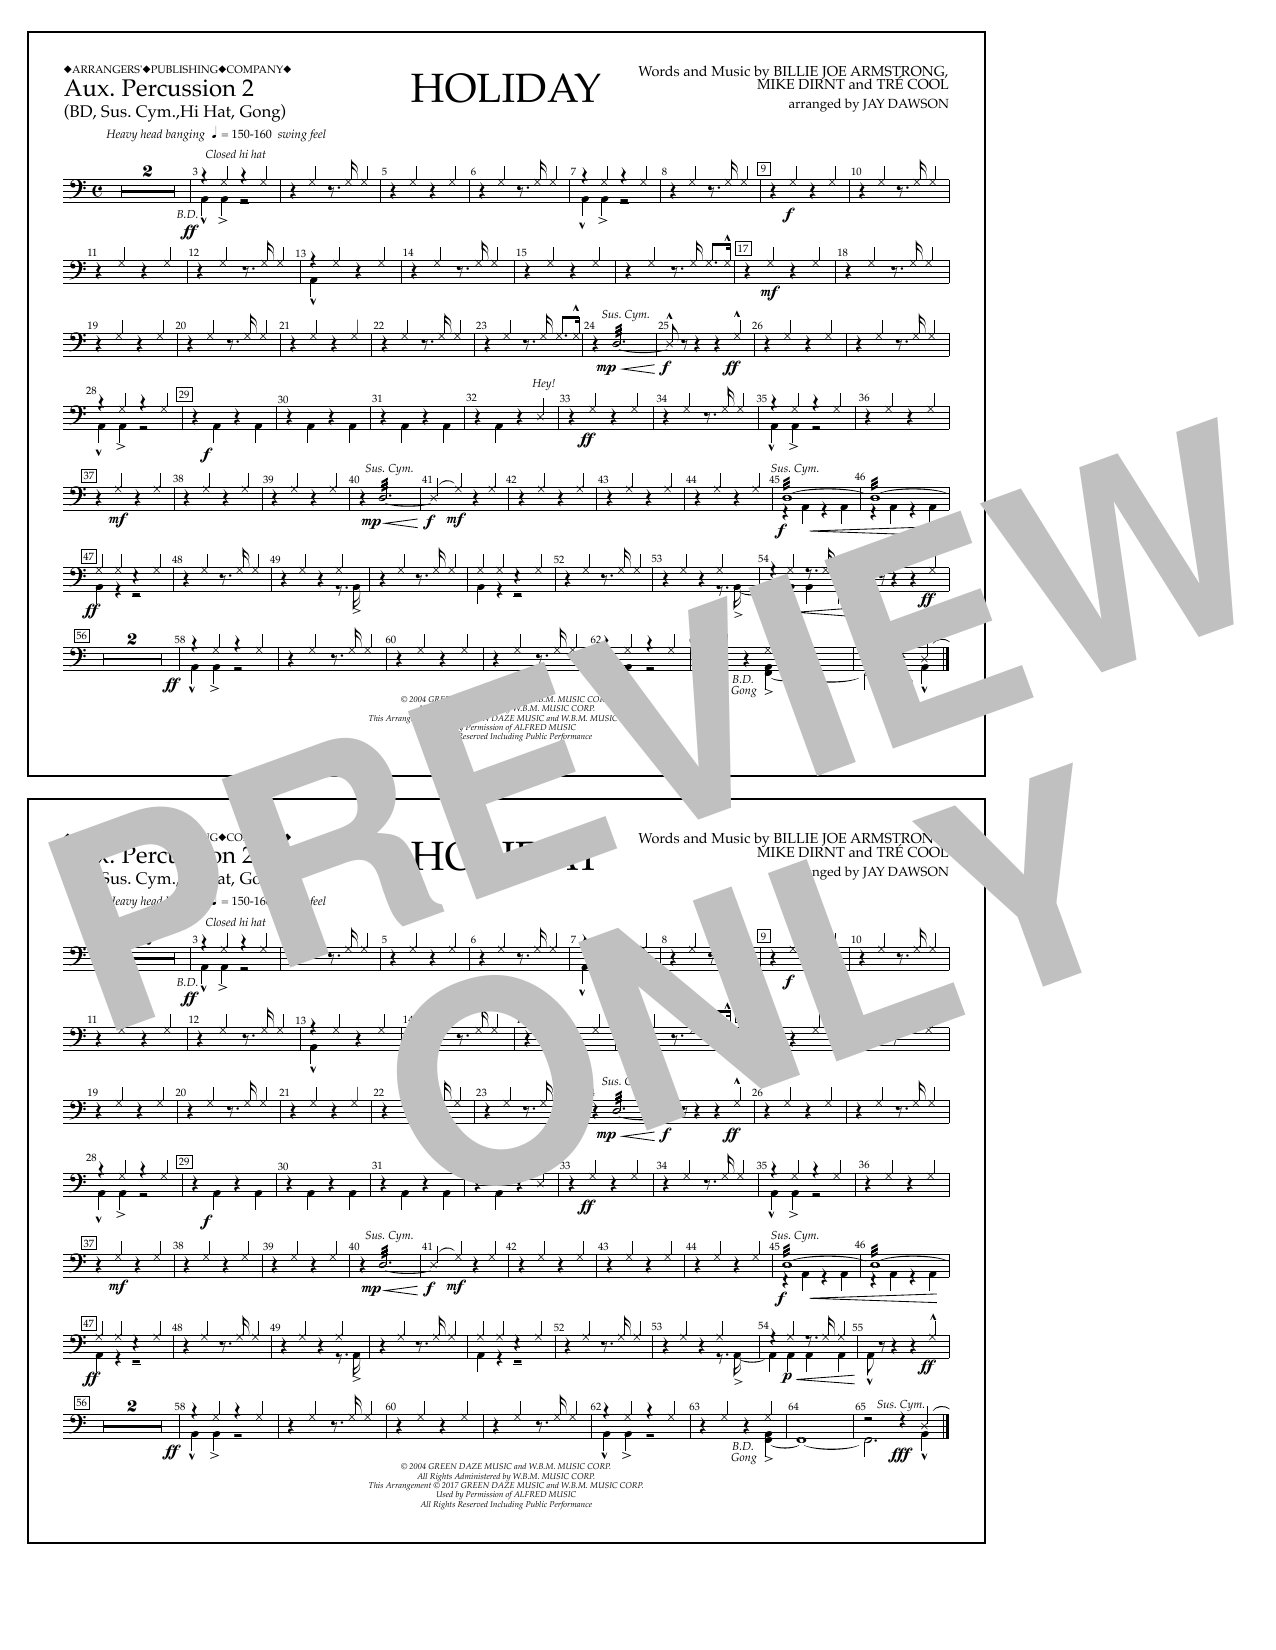 Download Jay Dawson Holiday - Aux. Percussion 2 Sheet Music